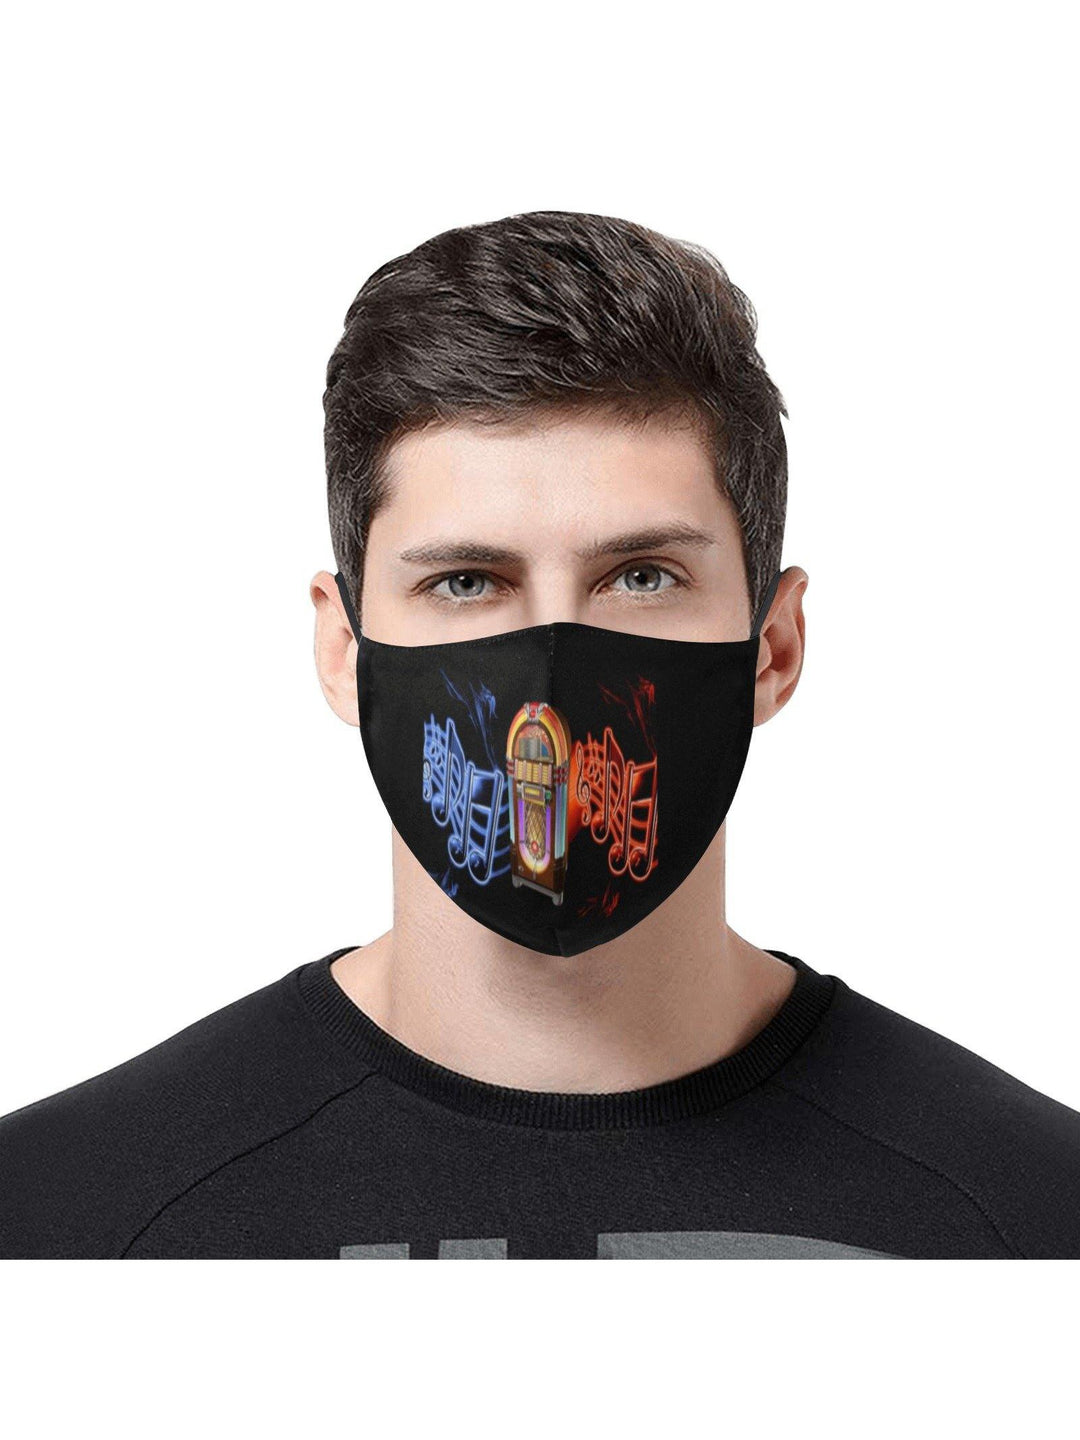 REUSABLE FACE MASKS WITH FILTERS - NEON JUKEBOX